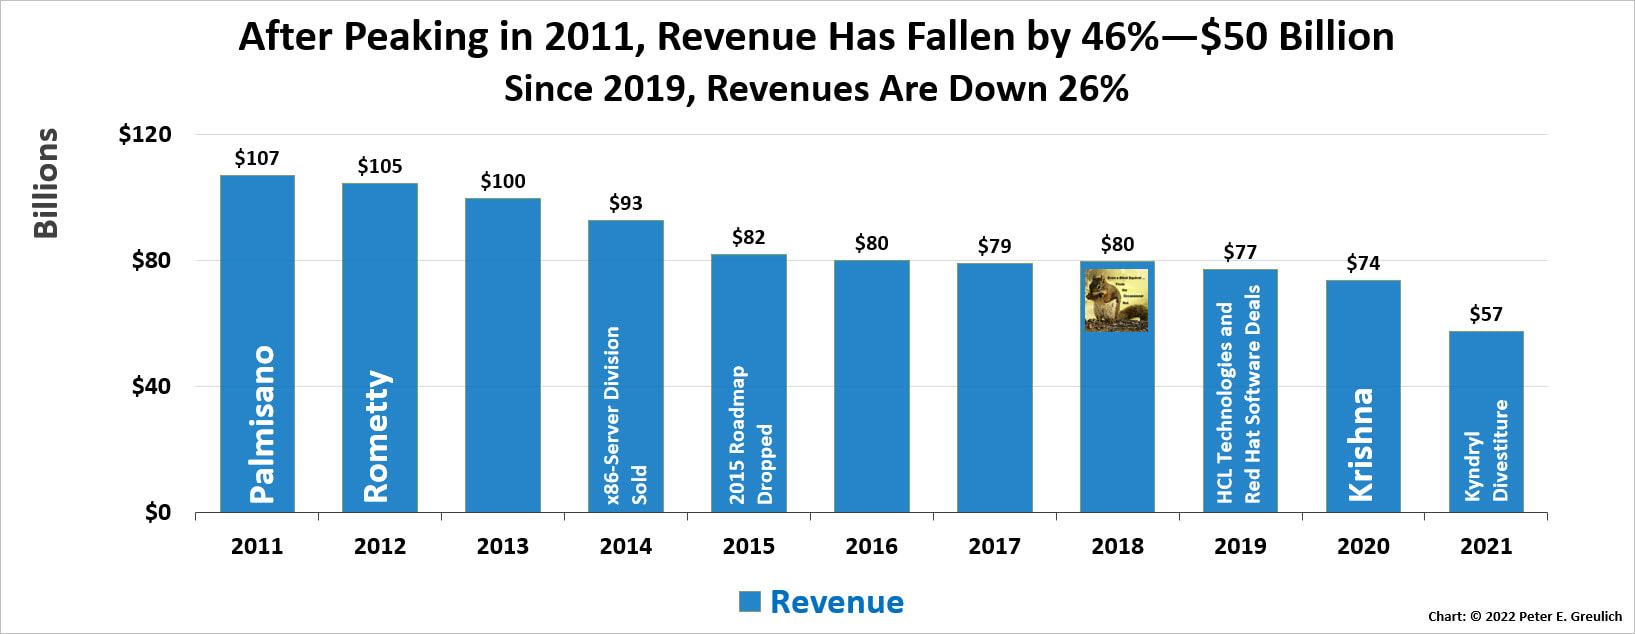 A bar chart showing IBM's yearly revenue performance from 2011 through 2020: Virginia M. (Ginni) Rometty and Arvind Krishna.